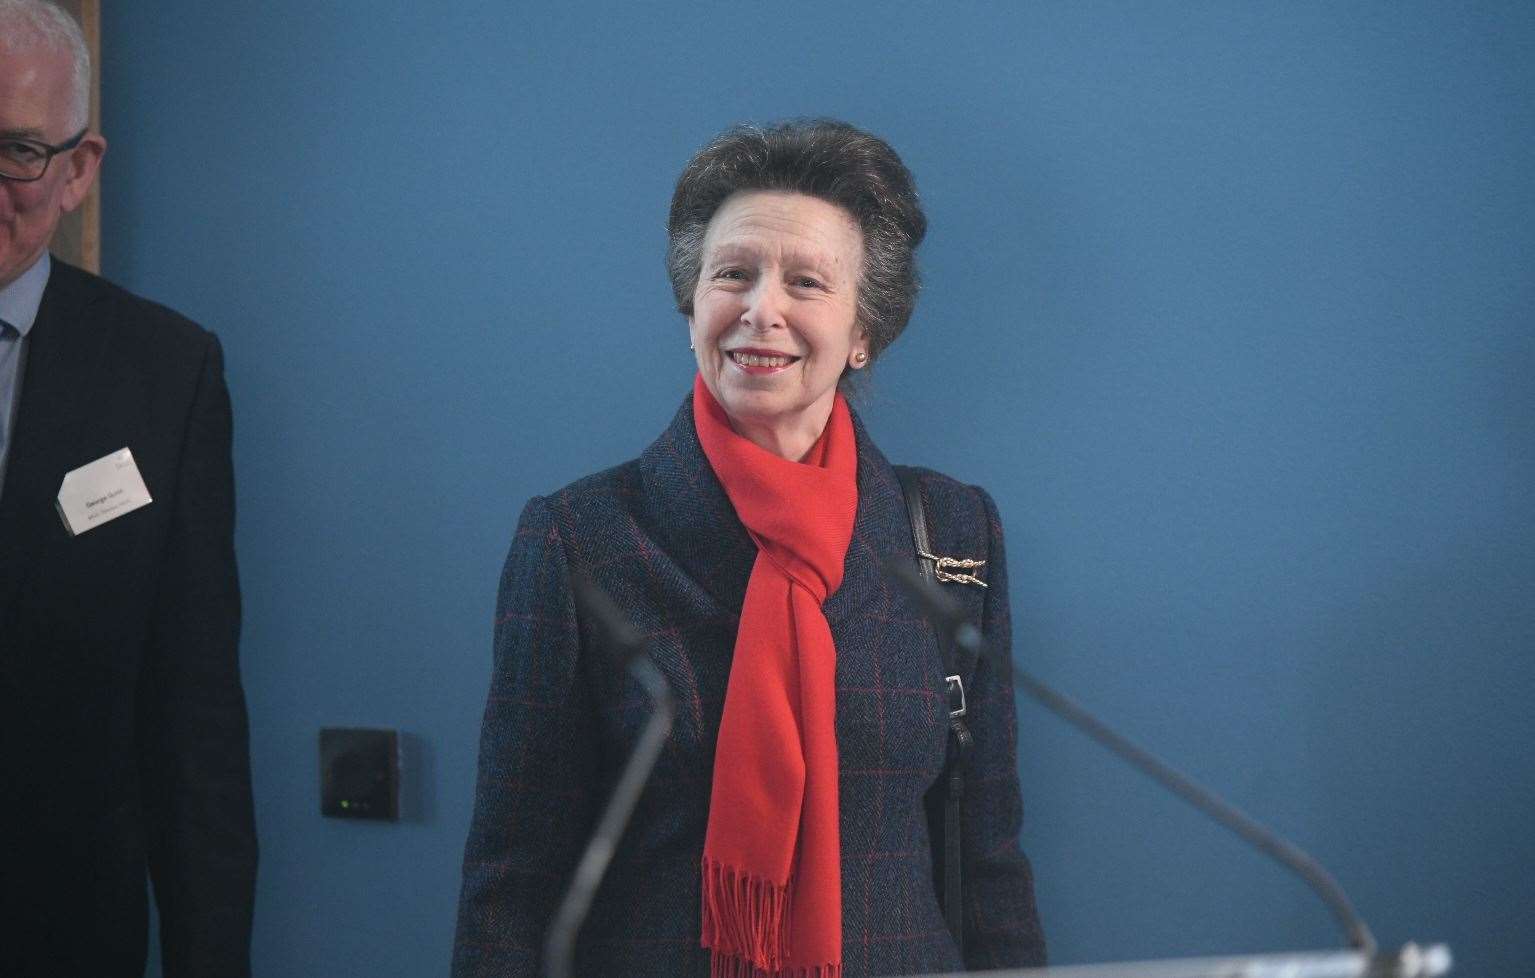 The new Rural and Veterinary Innovation Centre at Inverness Campus is officially opened by Princess Anne.